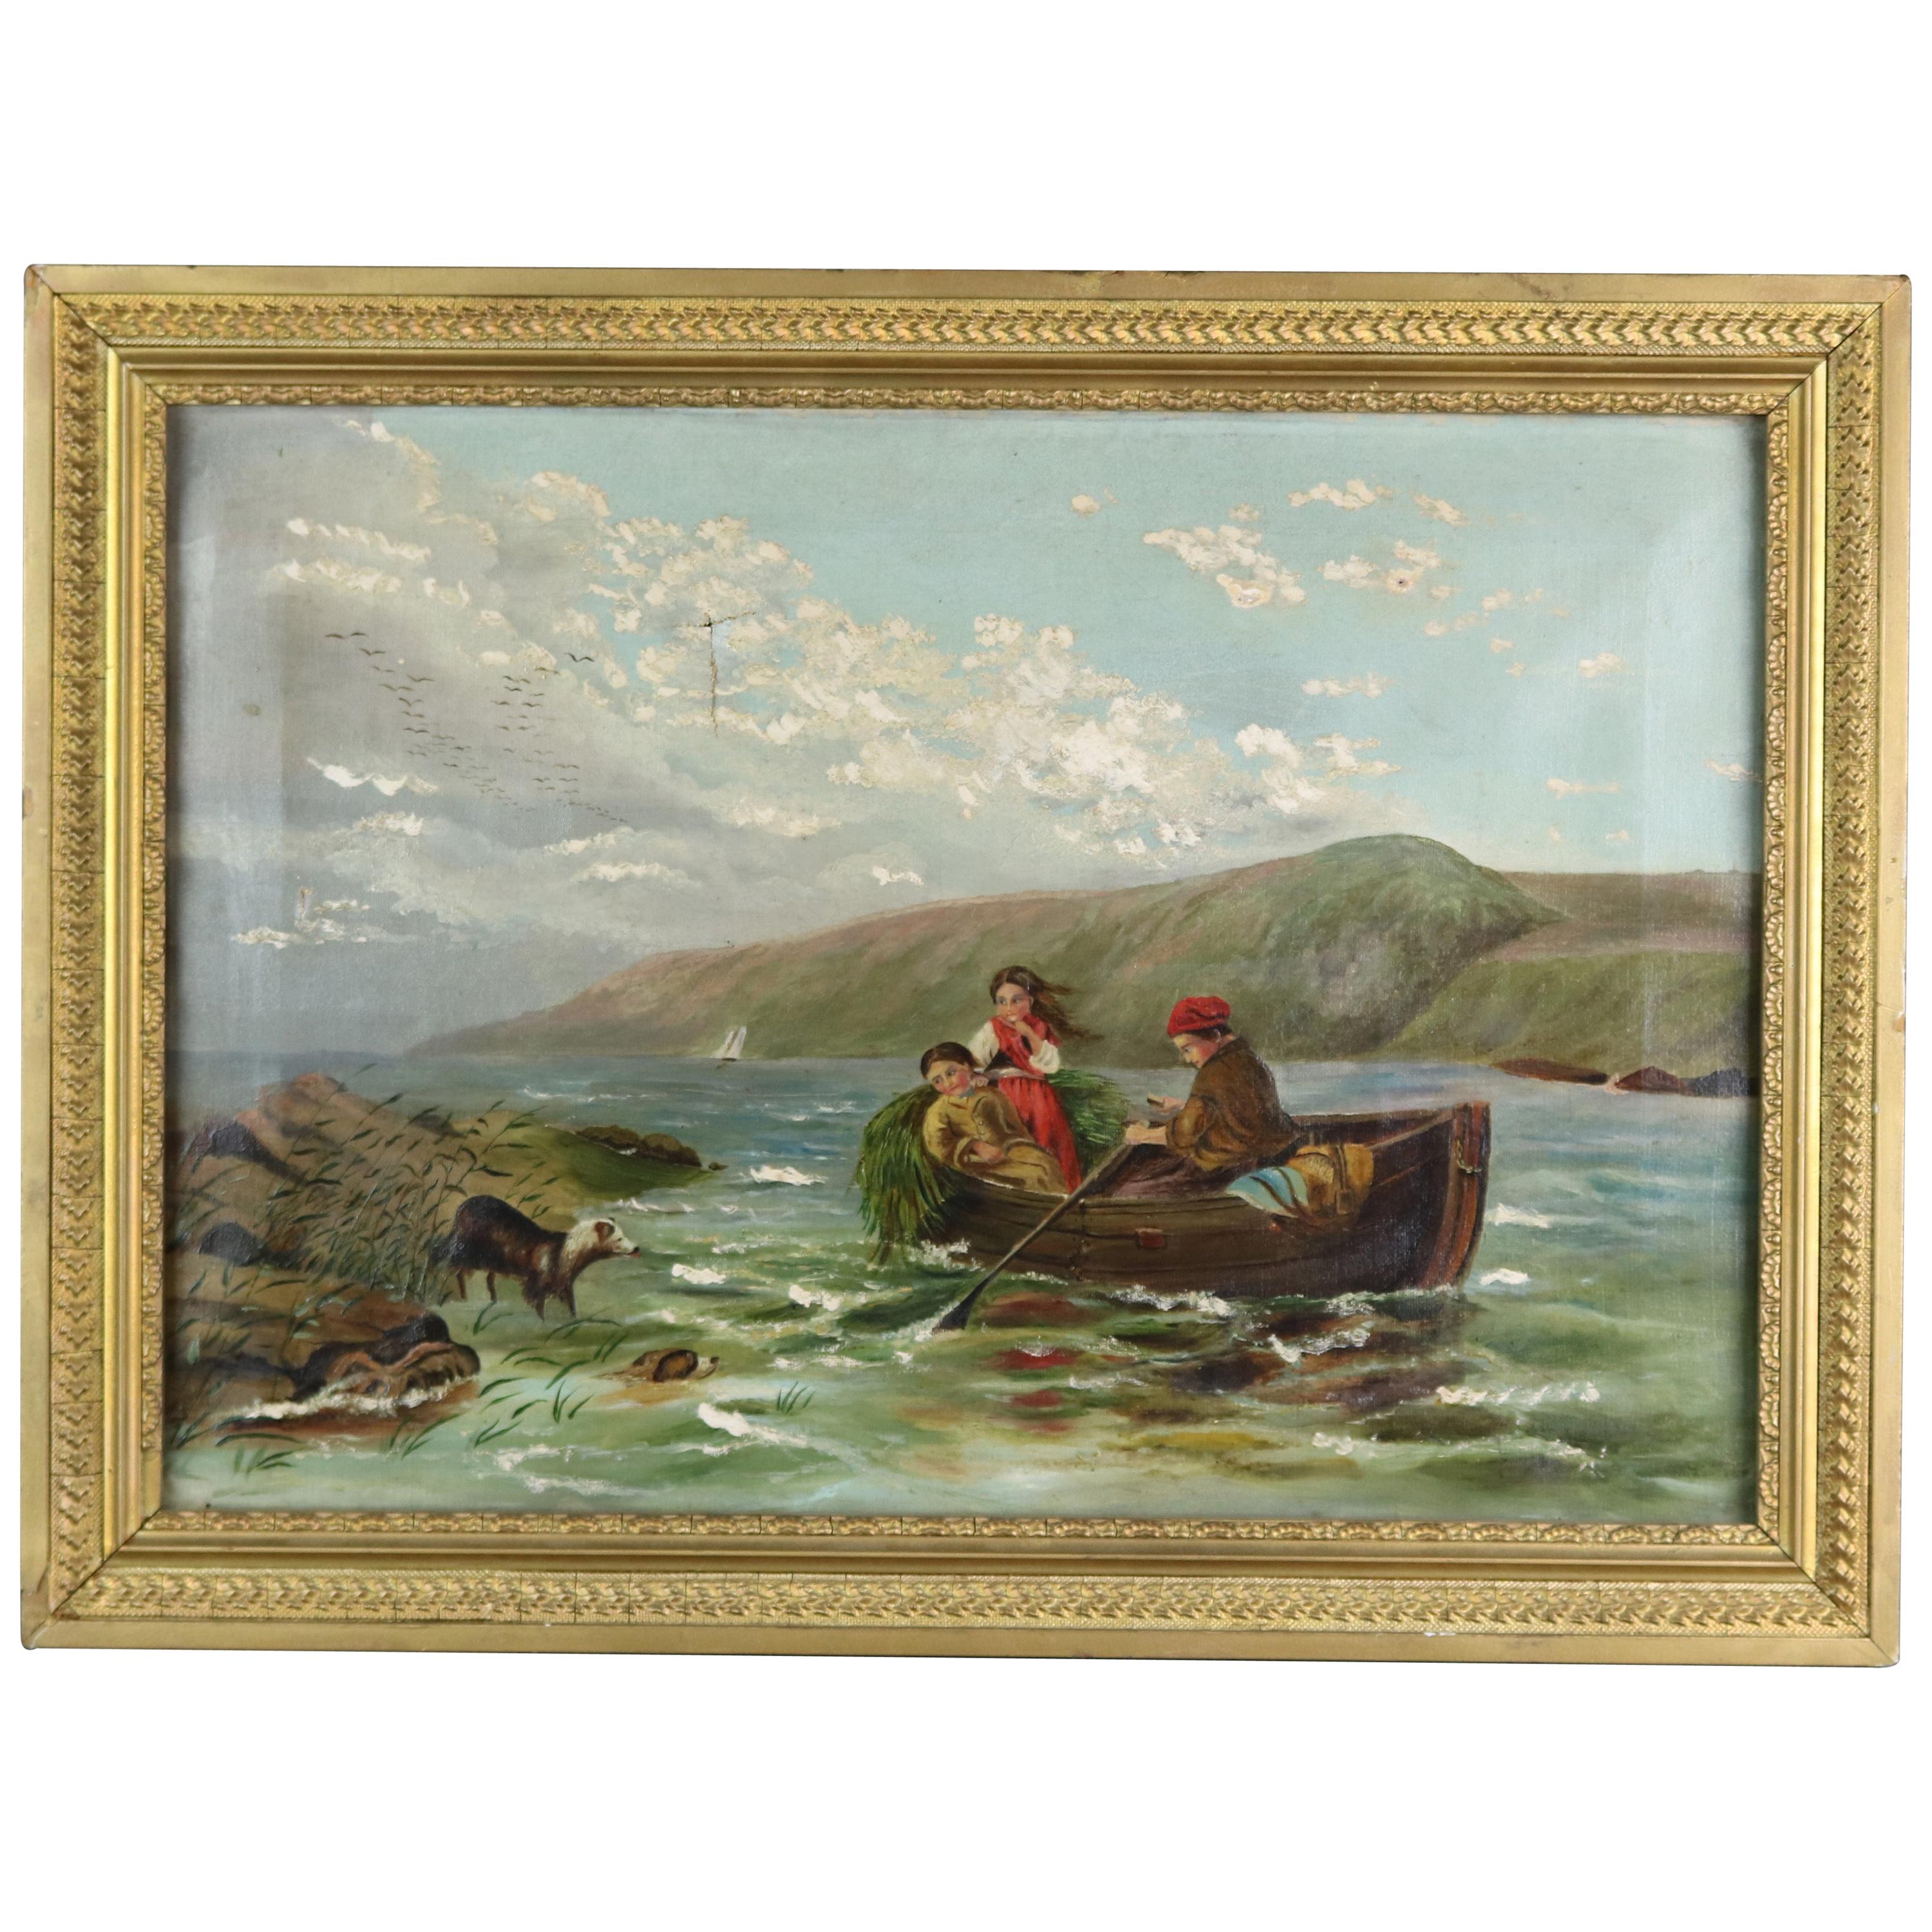 Antique Folk Art Oil on Canvas Painting of Children in Boat, Circa 1890